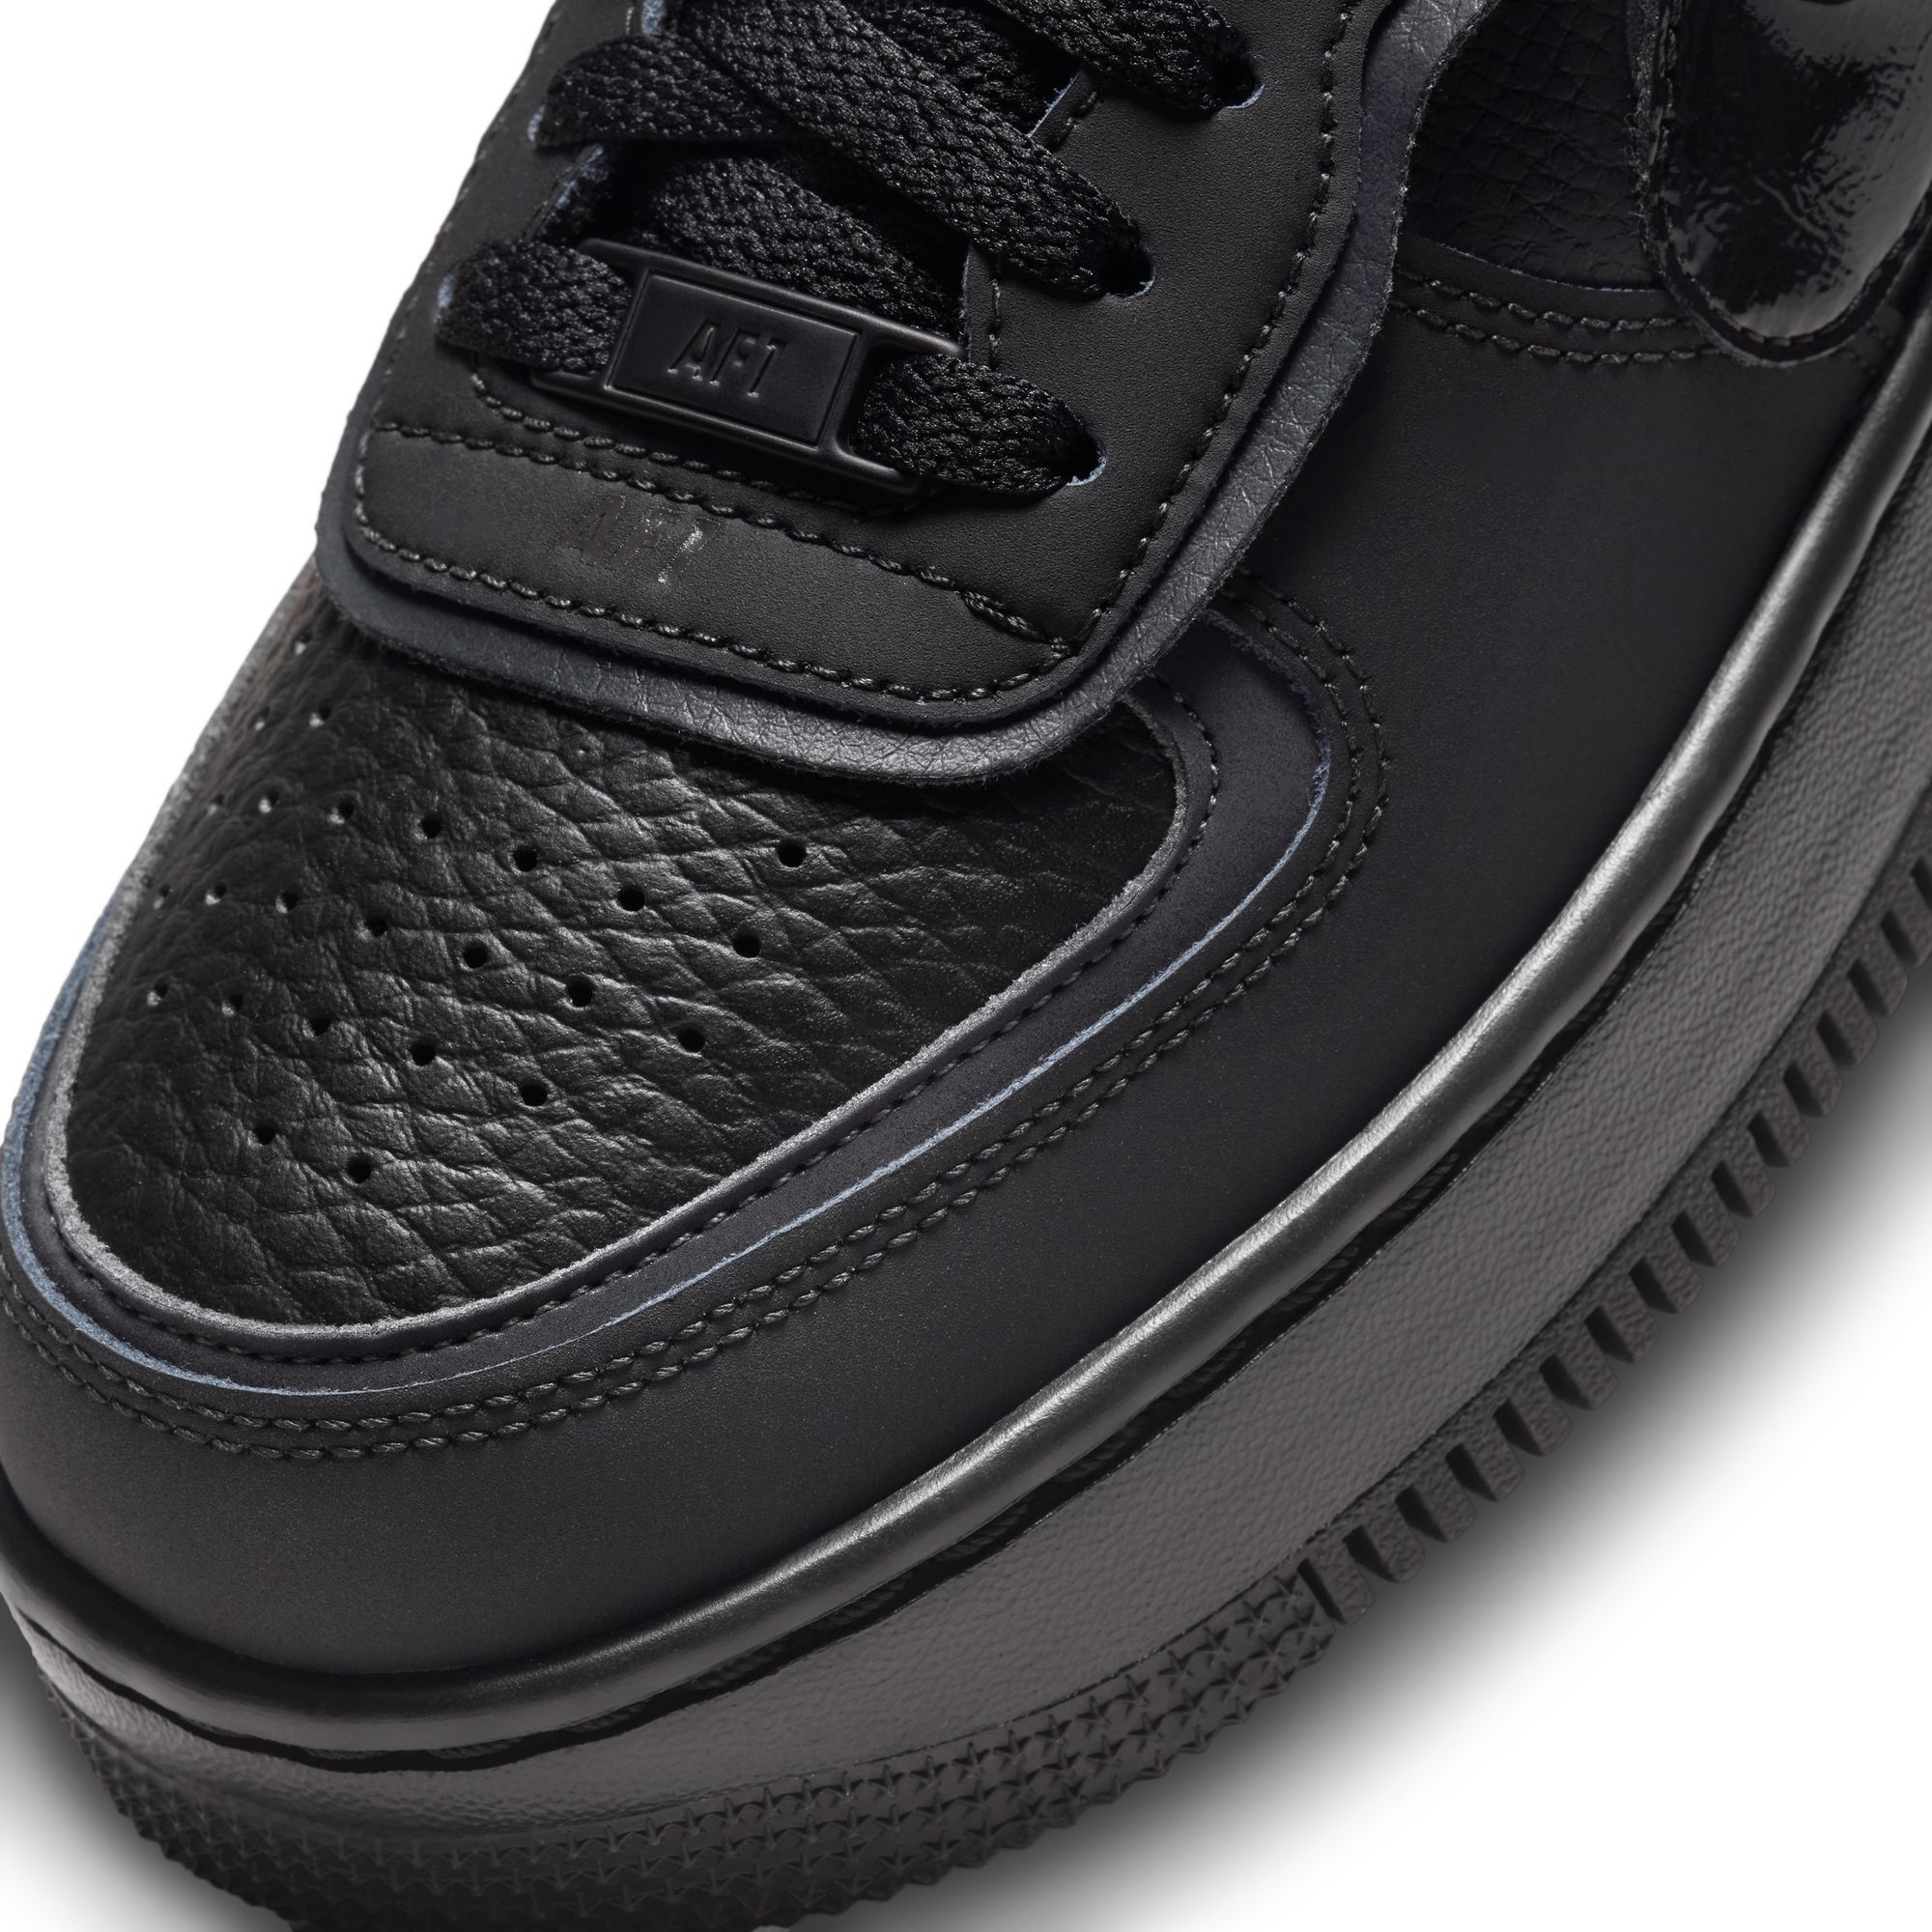 Nike Air Force 1 '07 LV8 3 Black/Anthracite